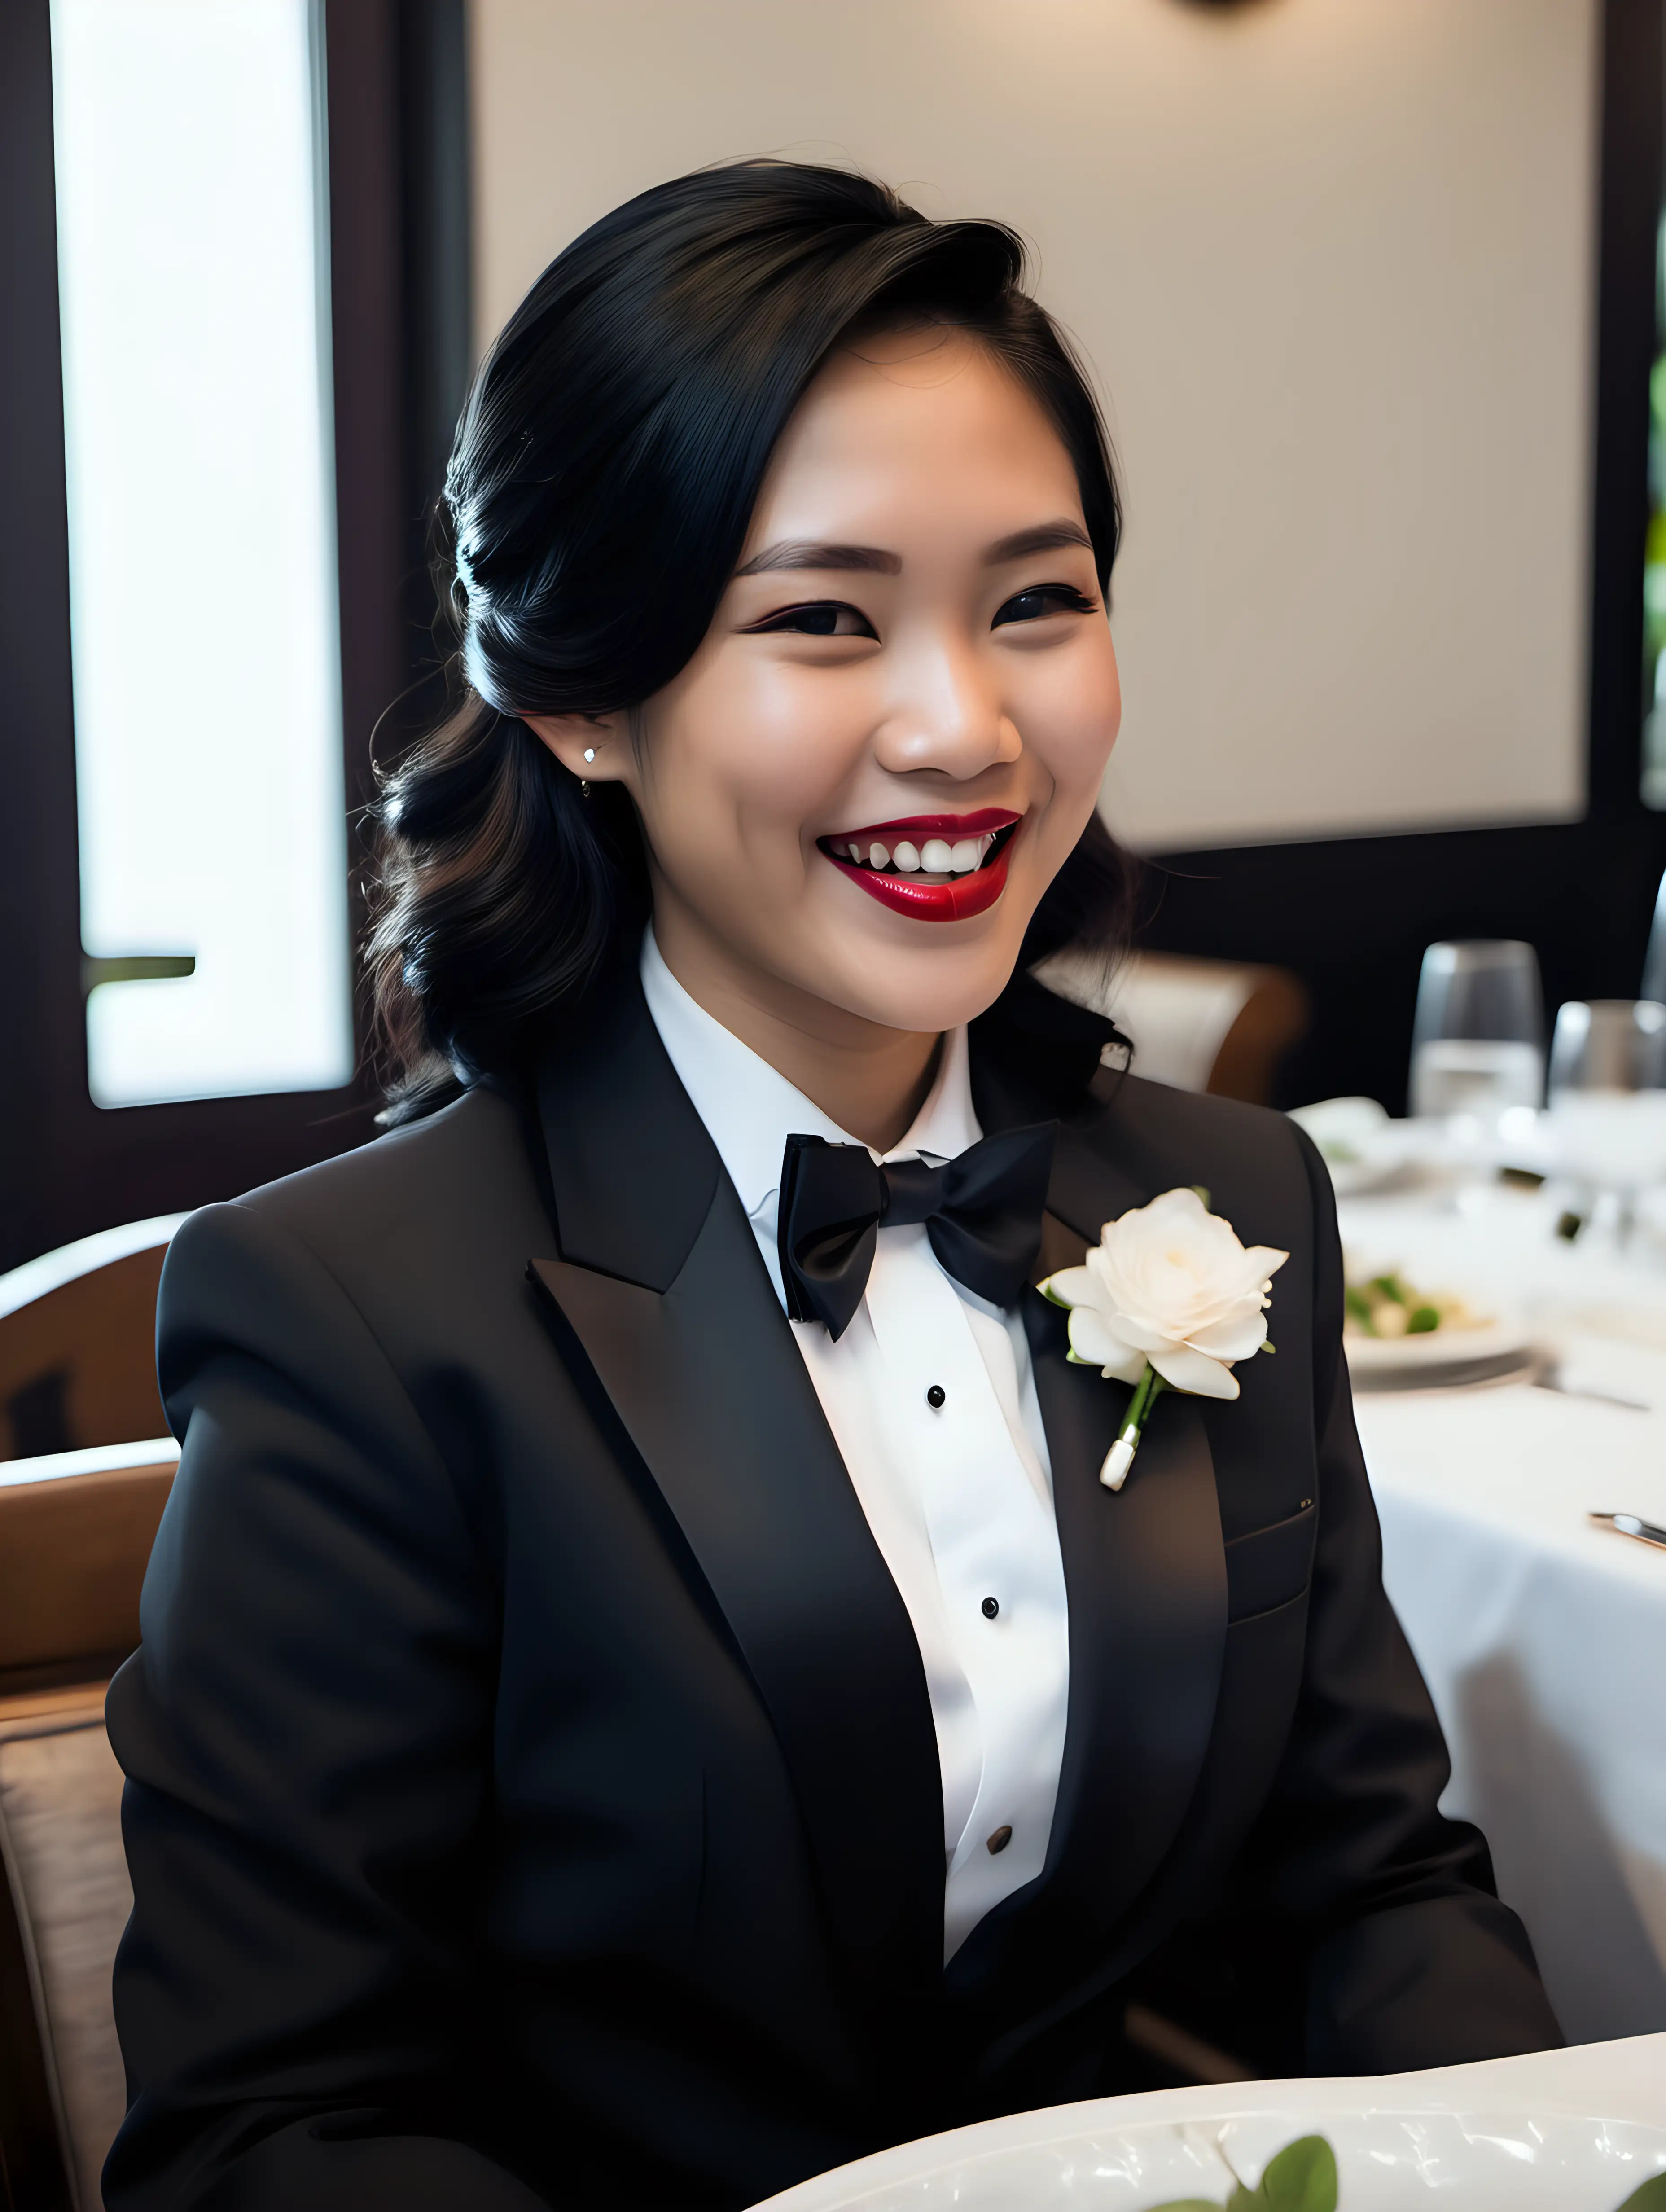 Elegant-Thai-Woman-in-Black-Tuxedo-with-Corsage-at-Dinner-Table